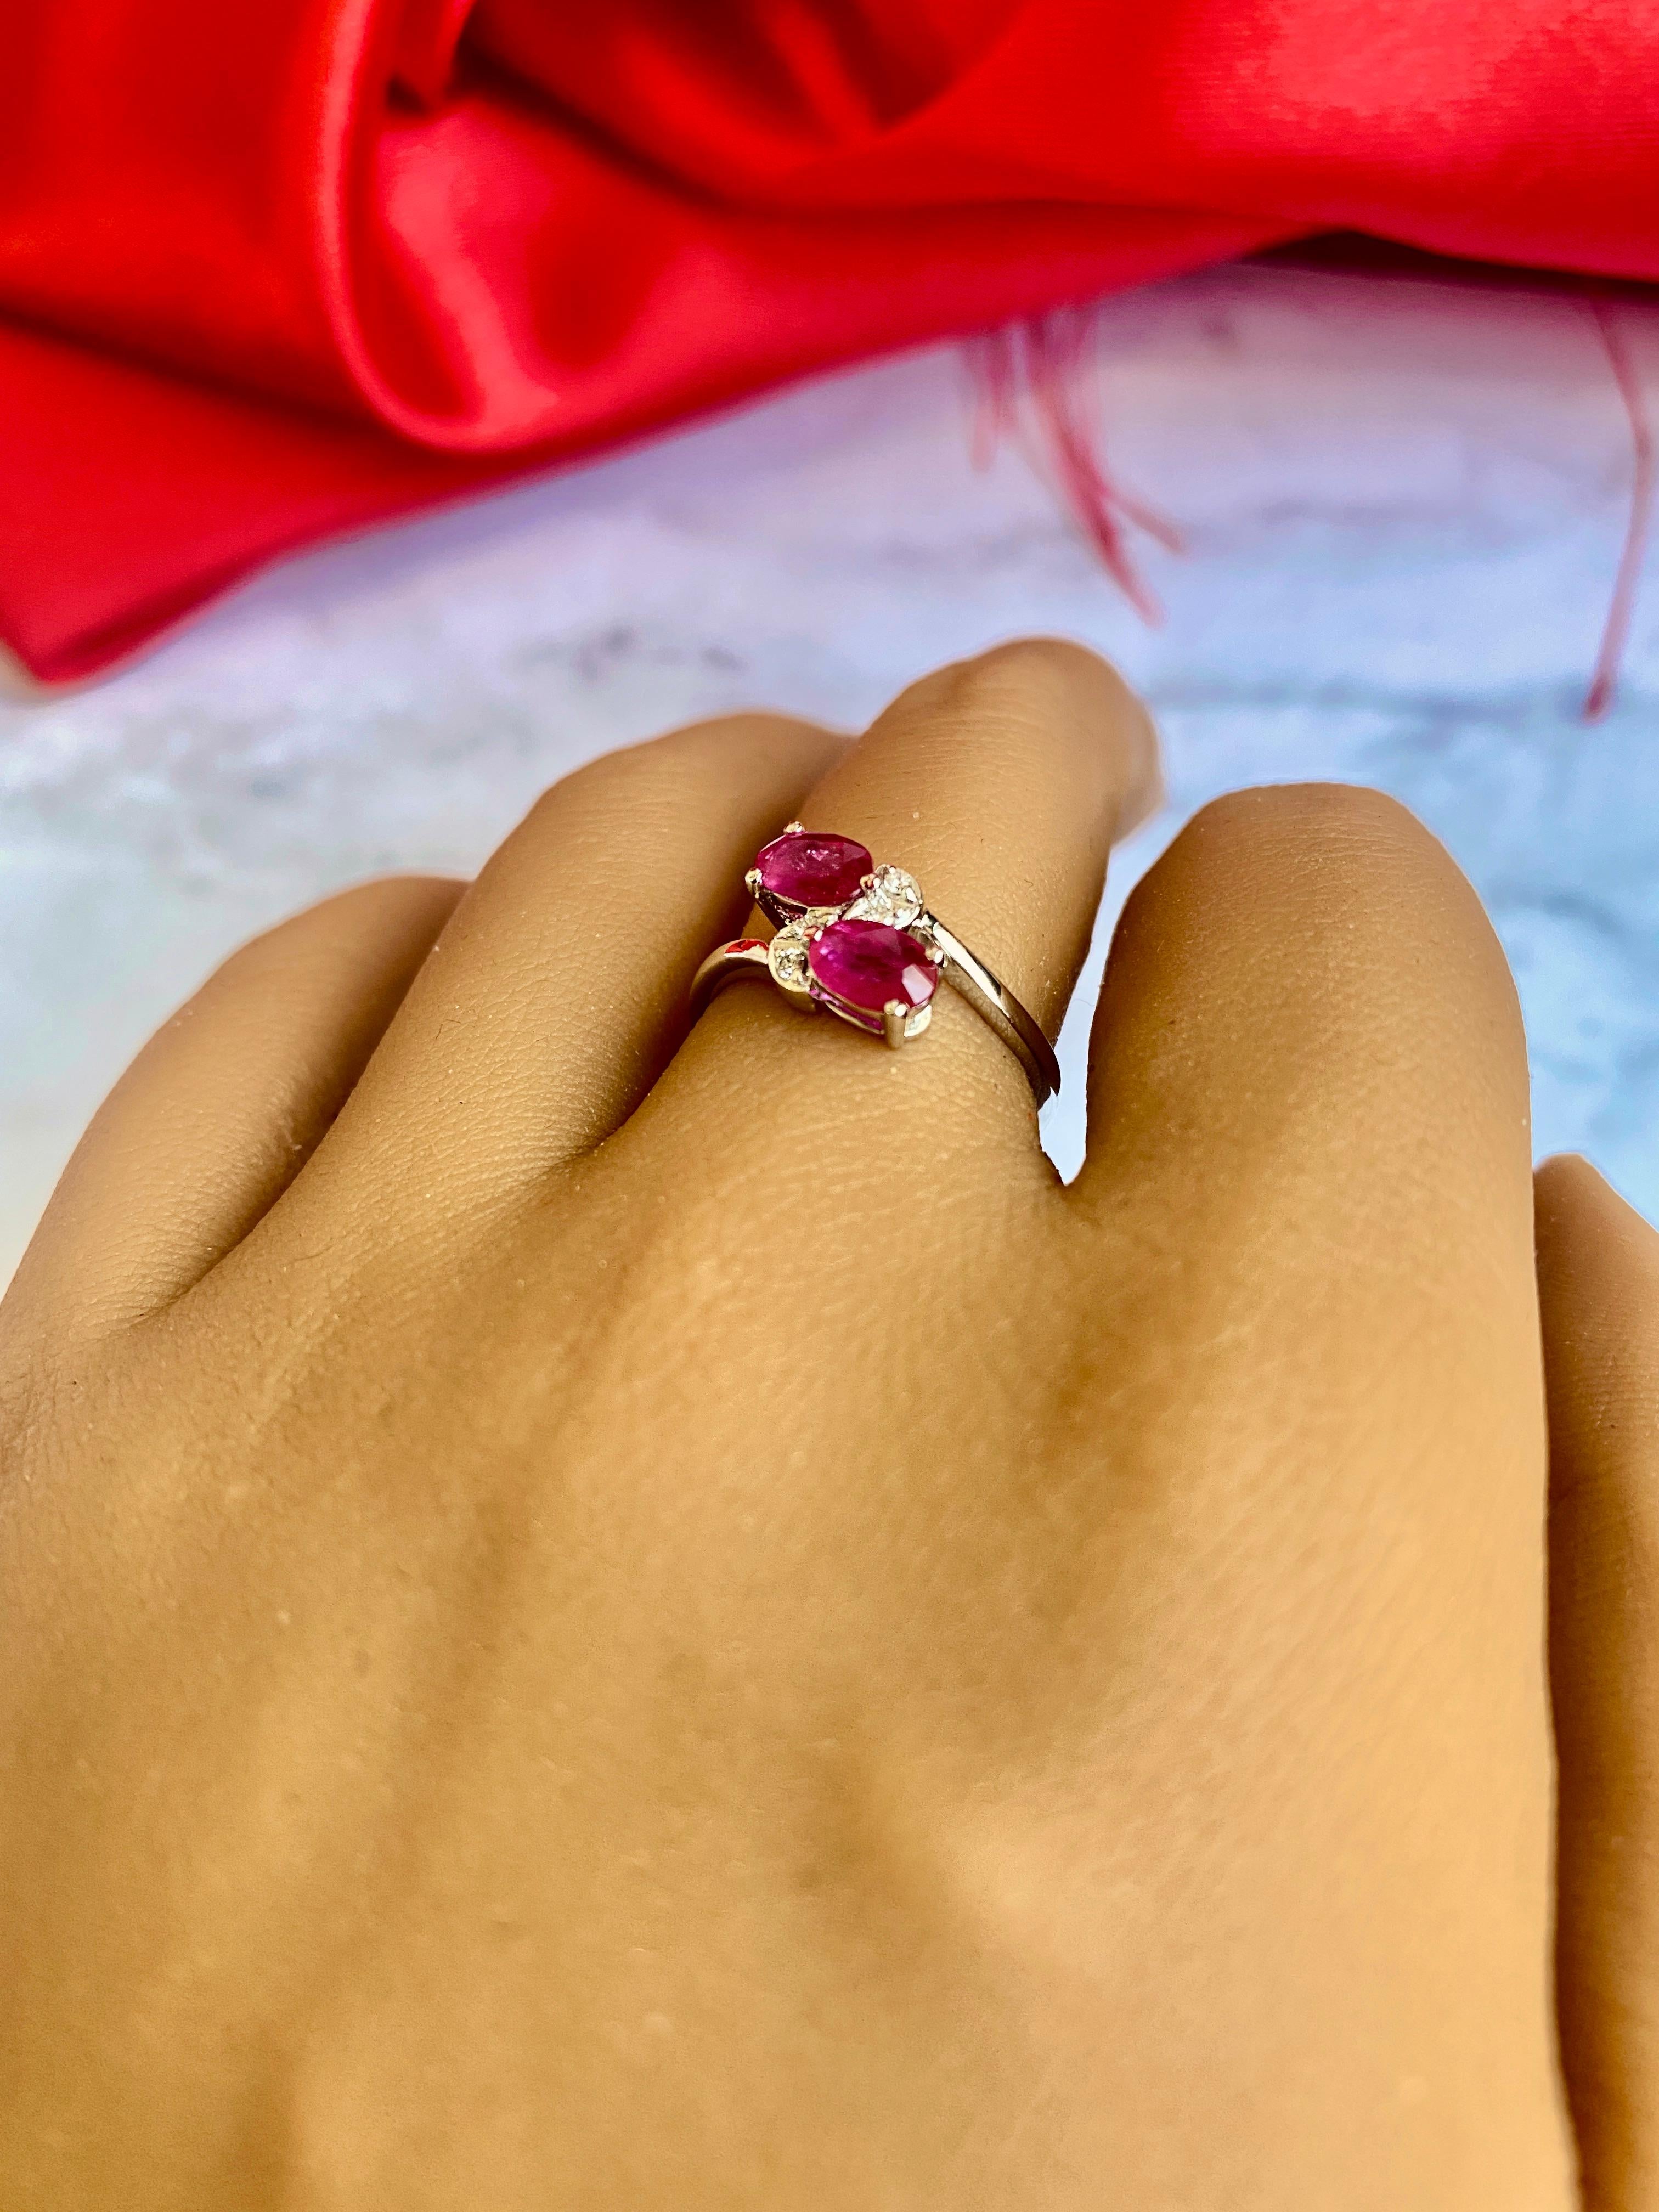 Oval Cut Ruby and Diamond Solitaire Ring with Natural Gemstone, 2 Stone Ring in 14k Gold For Sale